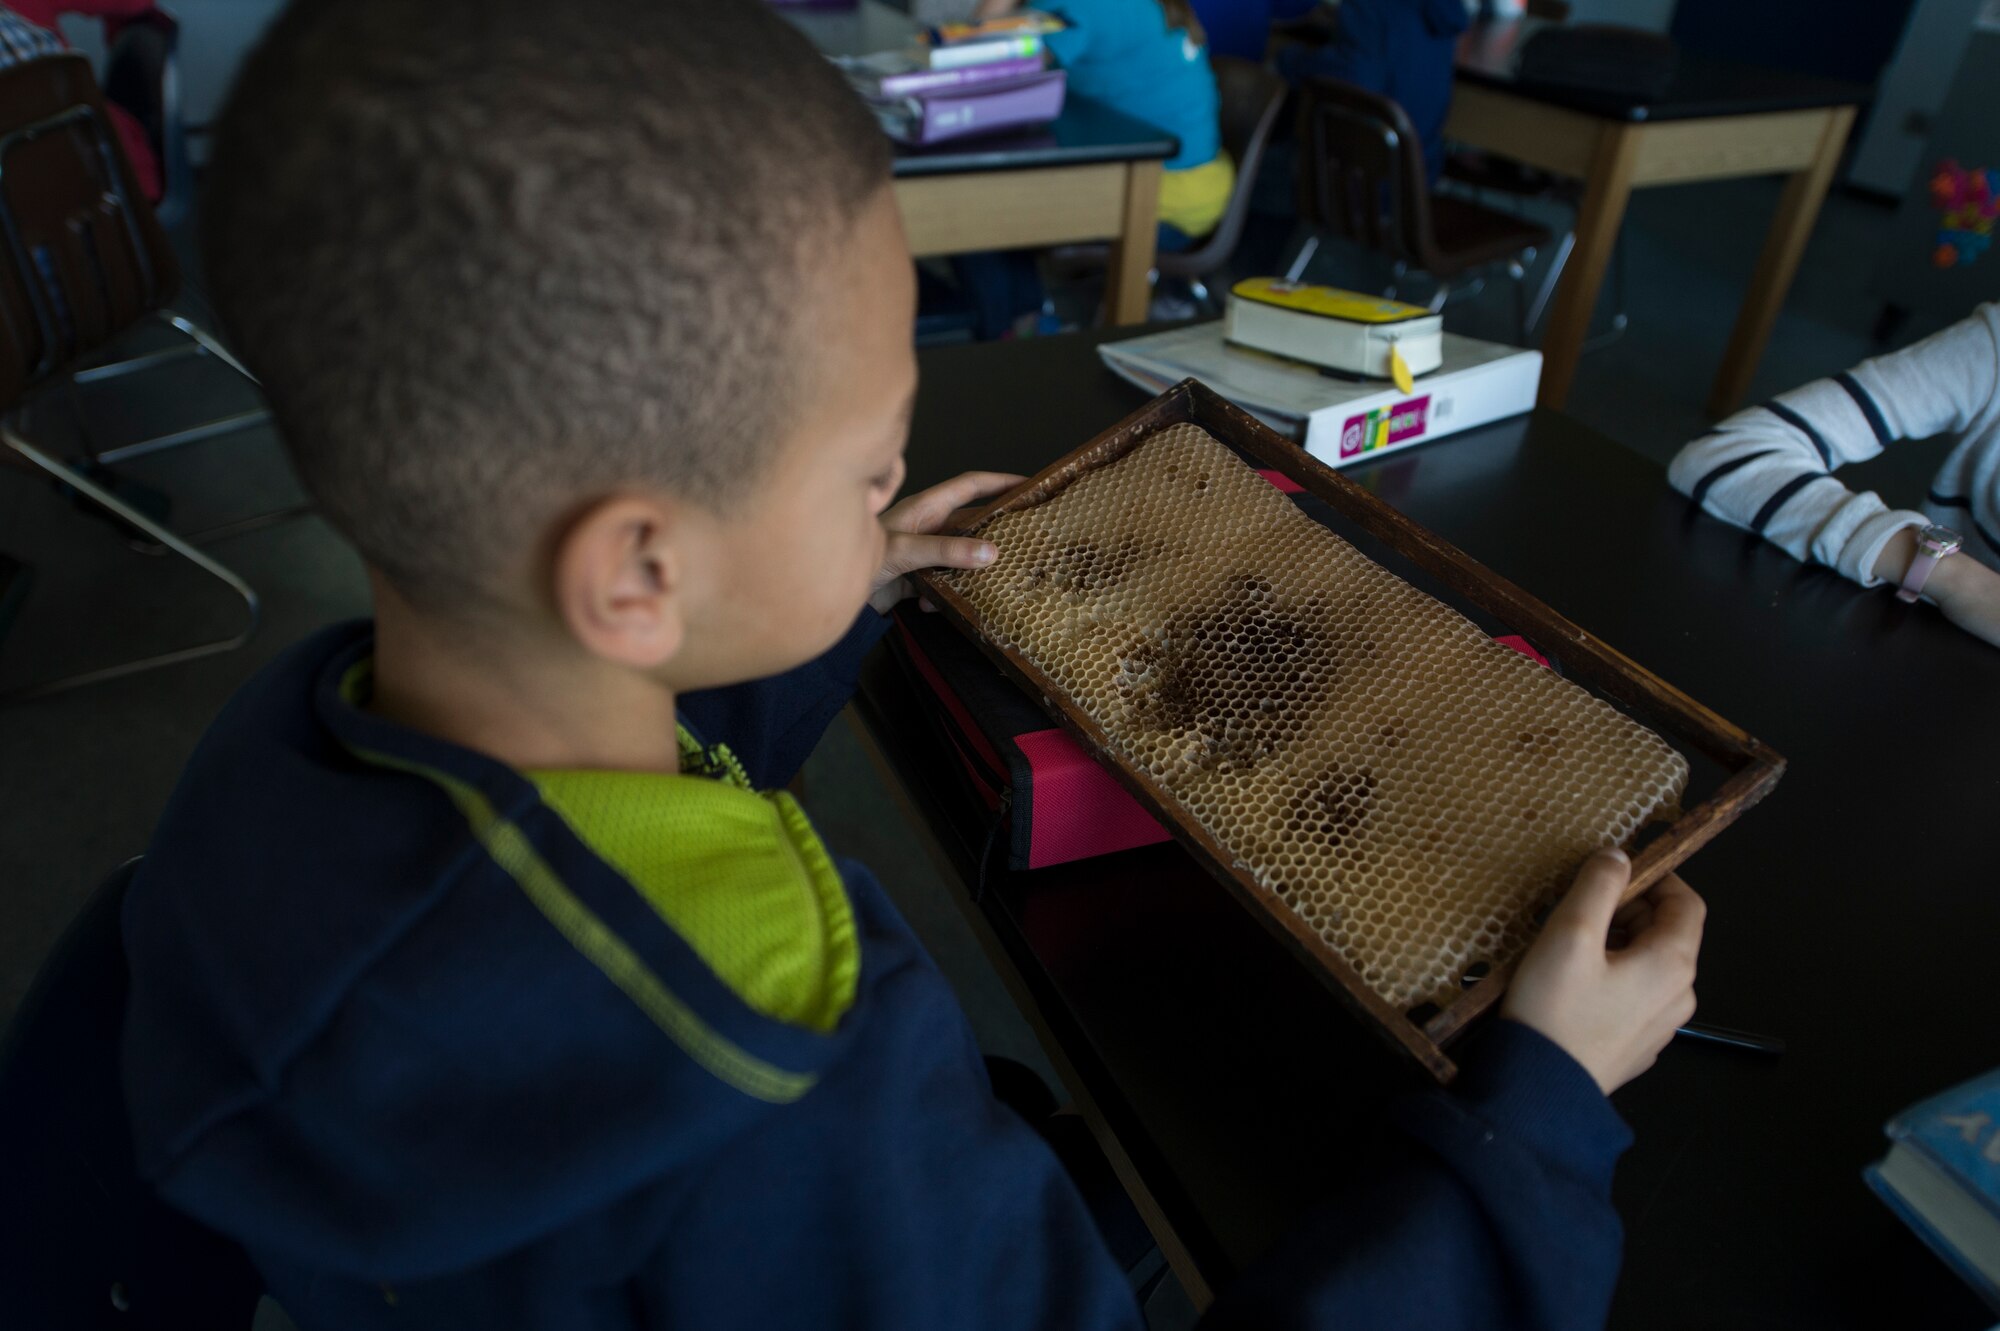 A Spangdahlem Middle School student examines a honey bee tray during an Earth Day classroom presentation by the 52nd Civil Engineer Squadron environmental element, April 22, 2015, at Spangdahlem Air Base, Germany.  The classes informed the students on conservation projects on base and around the world ensuring wildlife protection. (U.S. Air force photo by Staff Sgt. Christopher Ruano/Released)